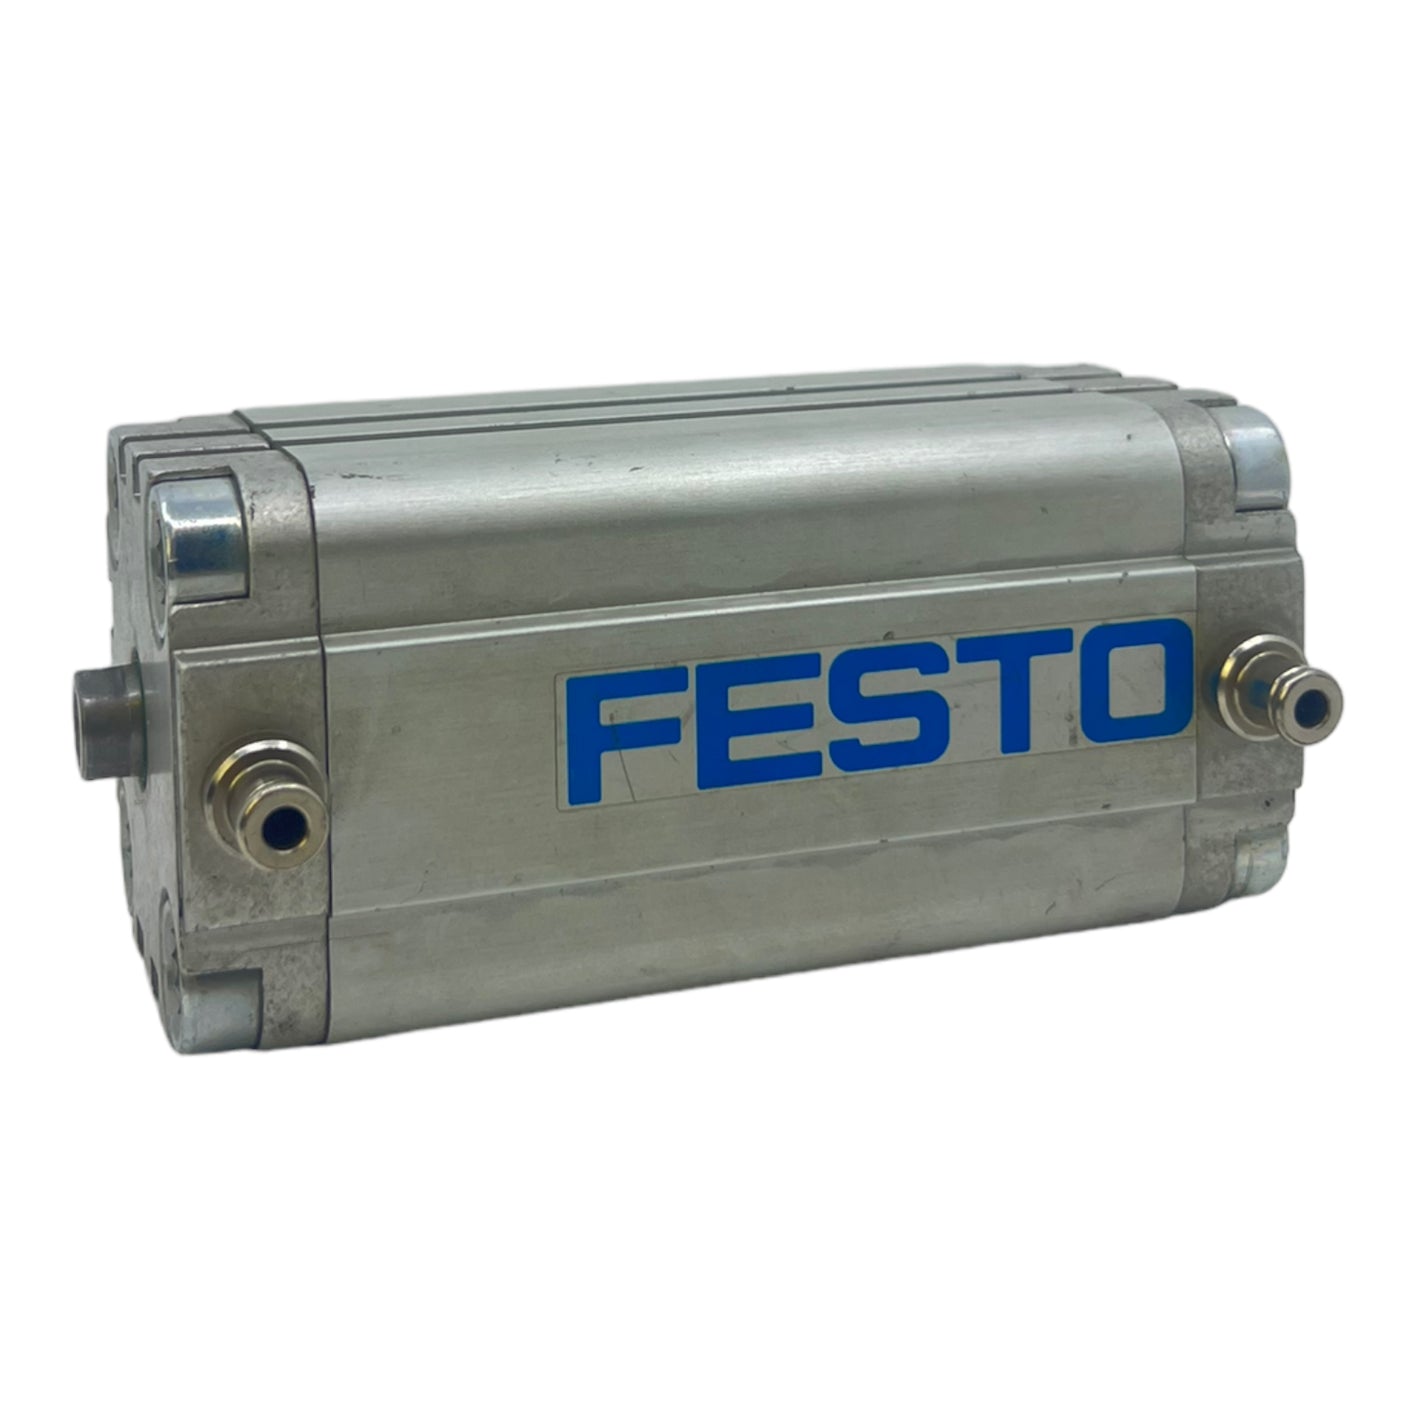 Festo ADVU-40-80-PA compact cylinder 156549 0.8 to 10 bar double-acting 